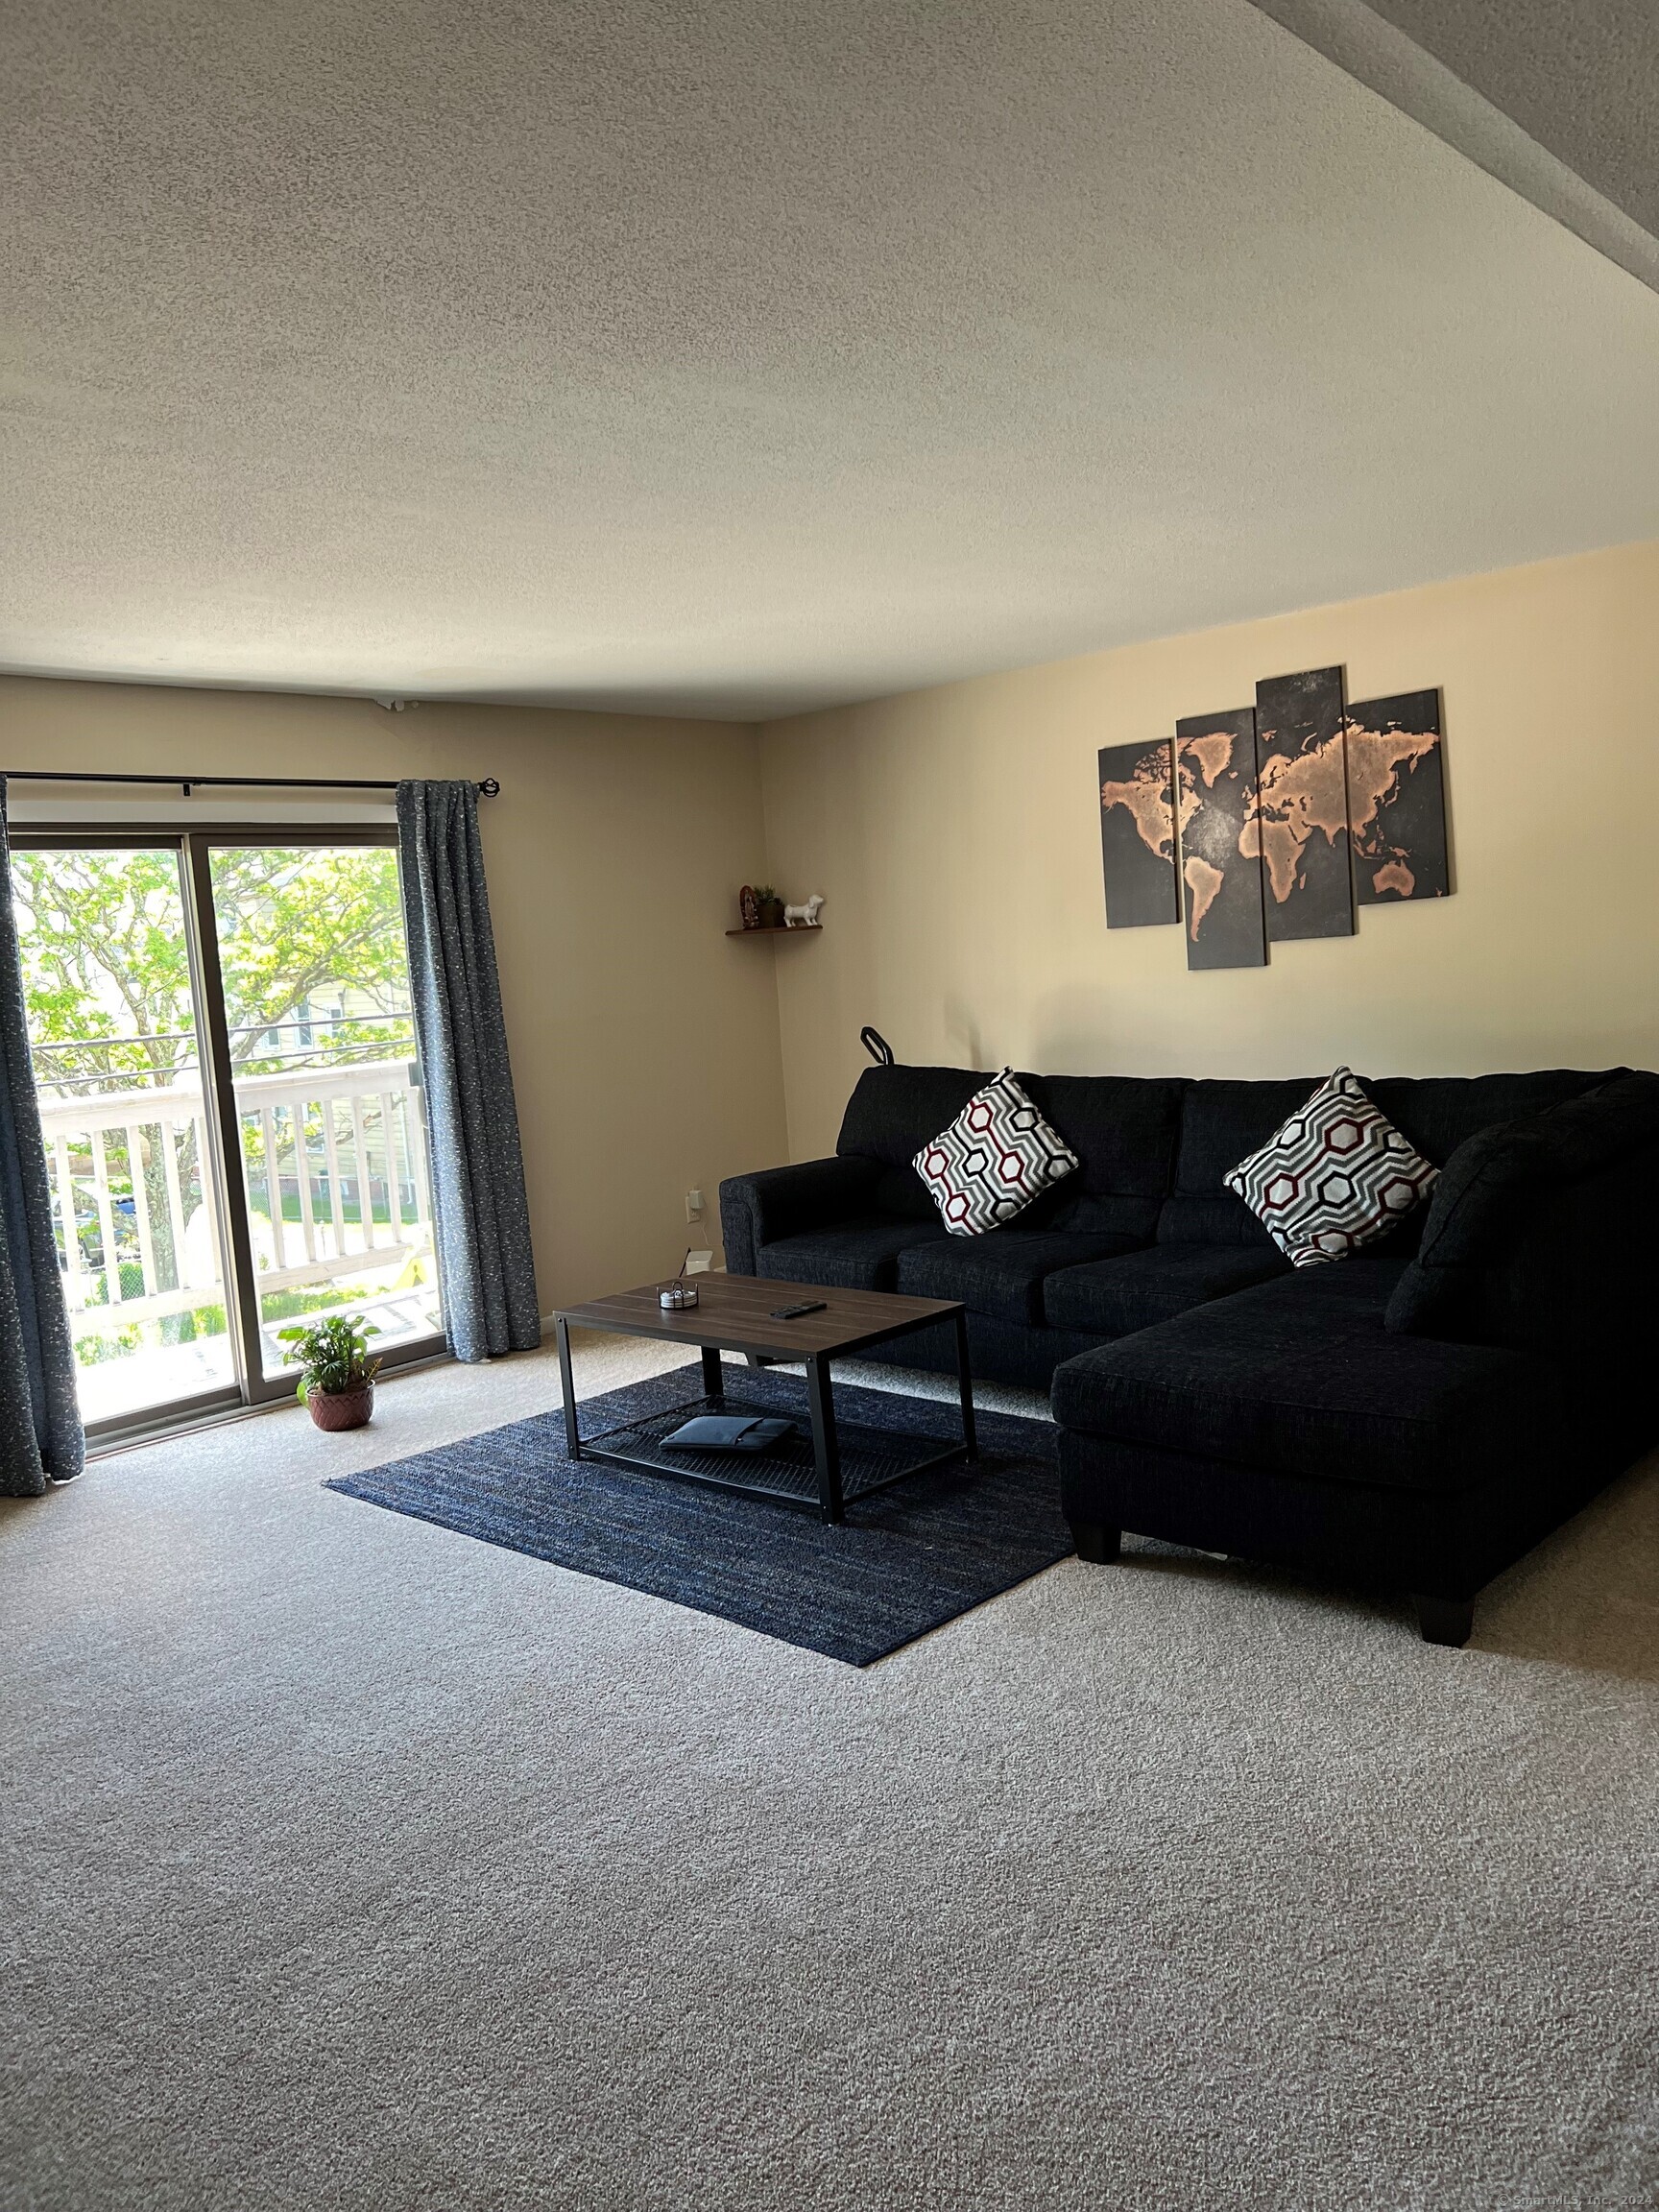 Property for Sale at 330 Savin Avenue Apt 9, West Haven, Connecticut - Bedrooms: 1 
Bathrooms: 1 
Rooms: 3  - $175,000